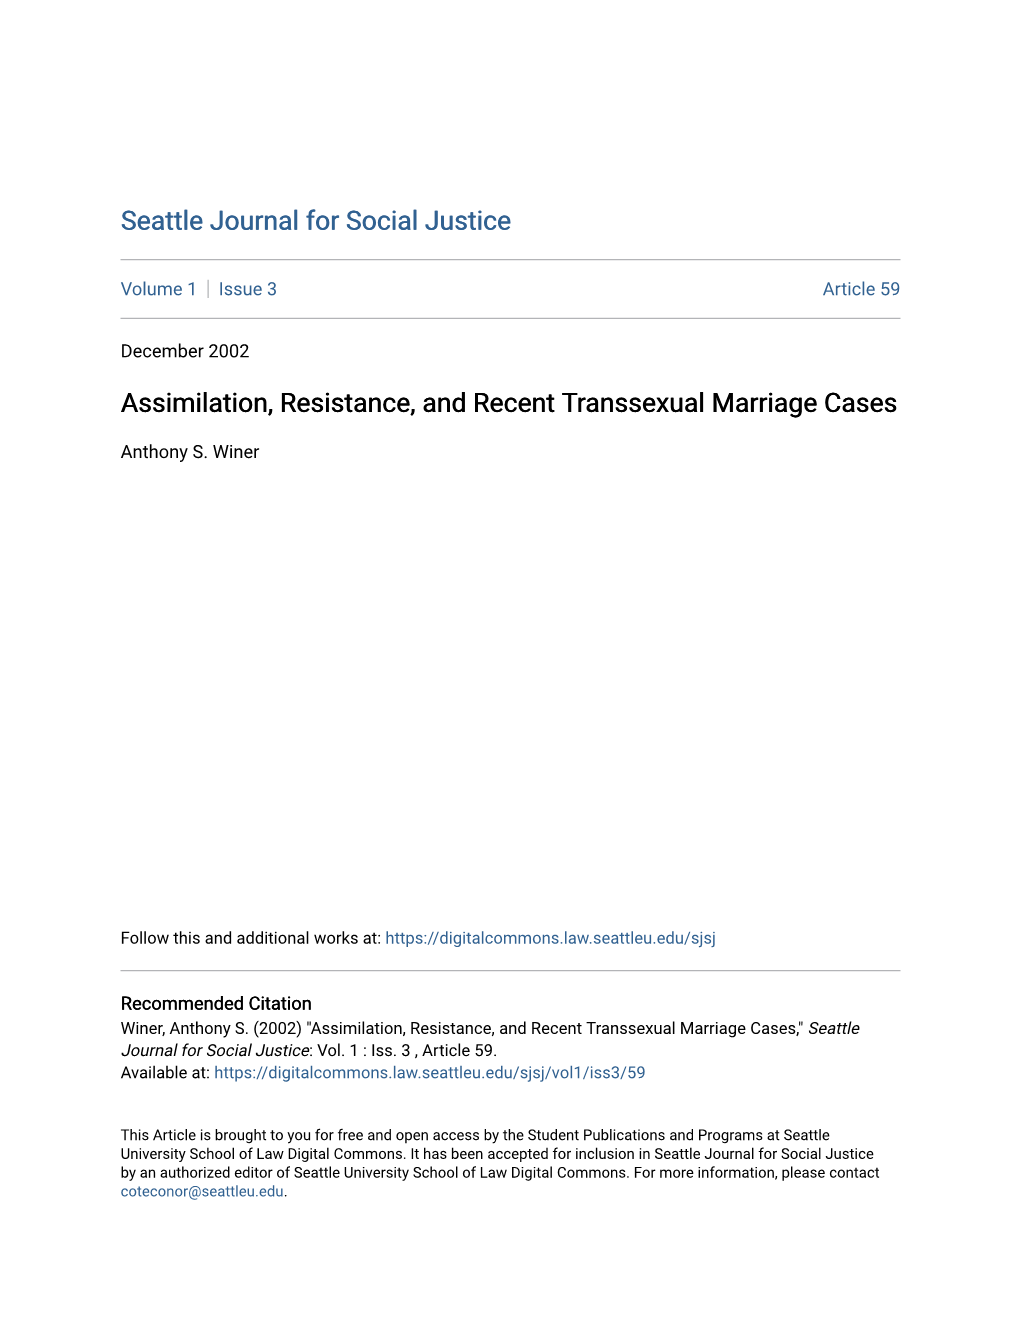 Assimilation, Resistance, and Recent Transsexual Marriage Cases